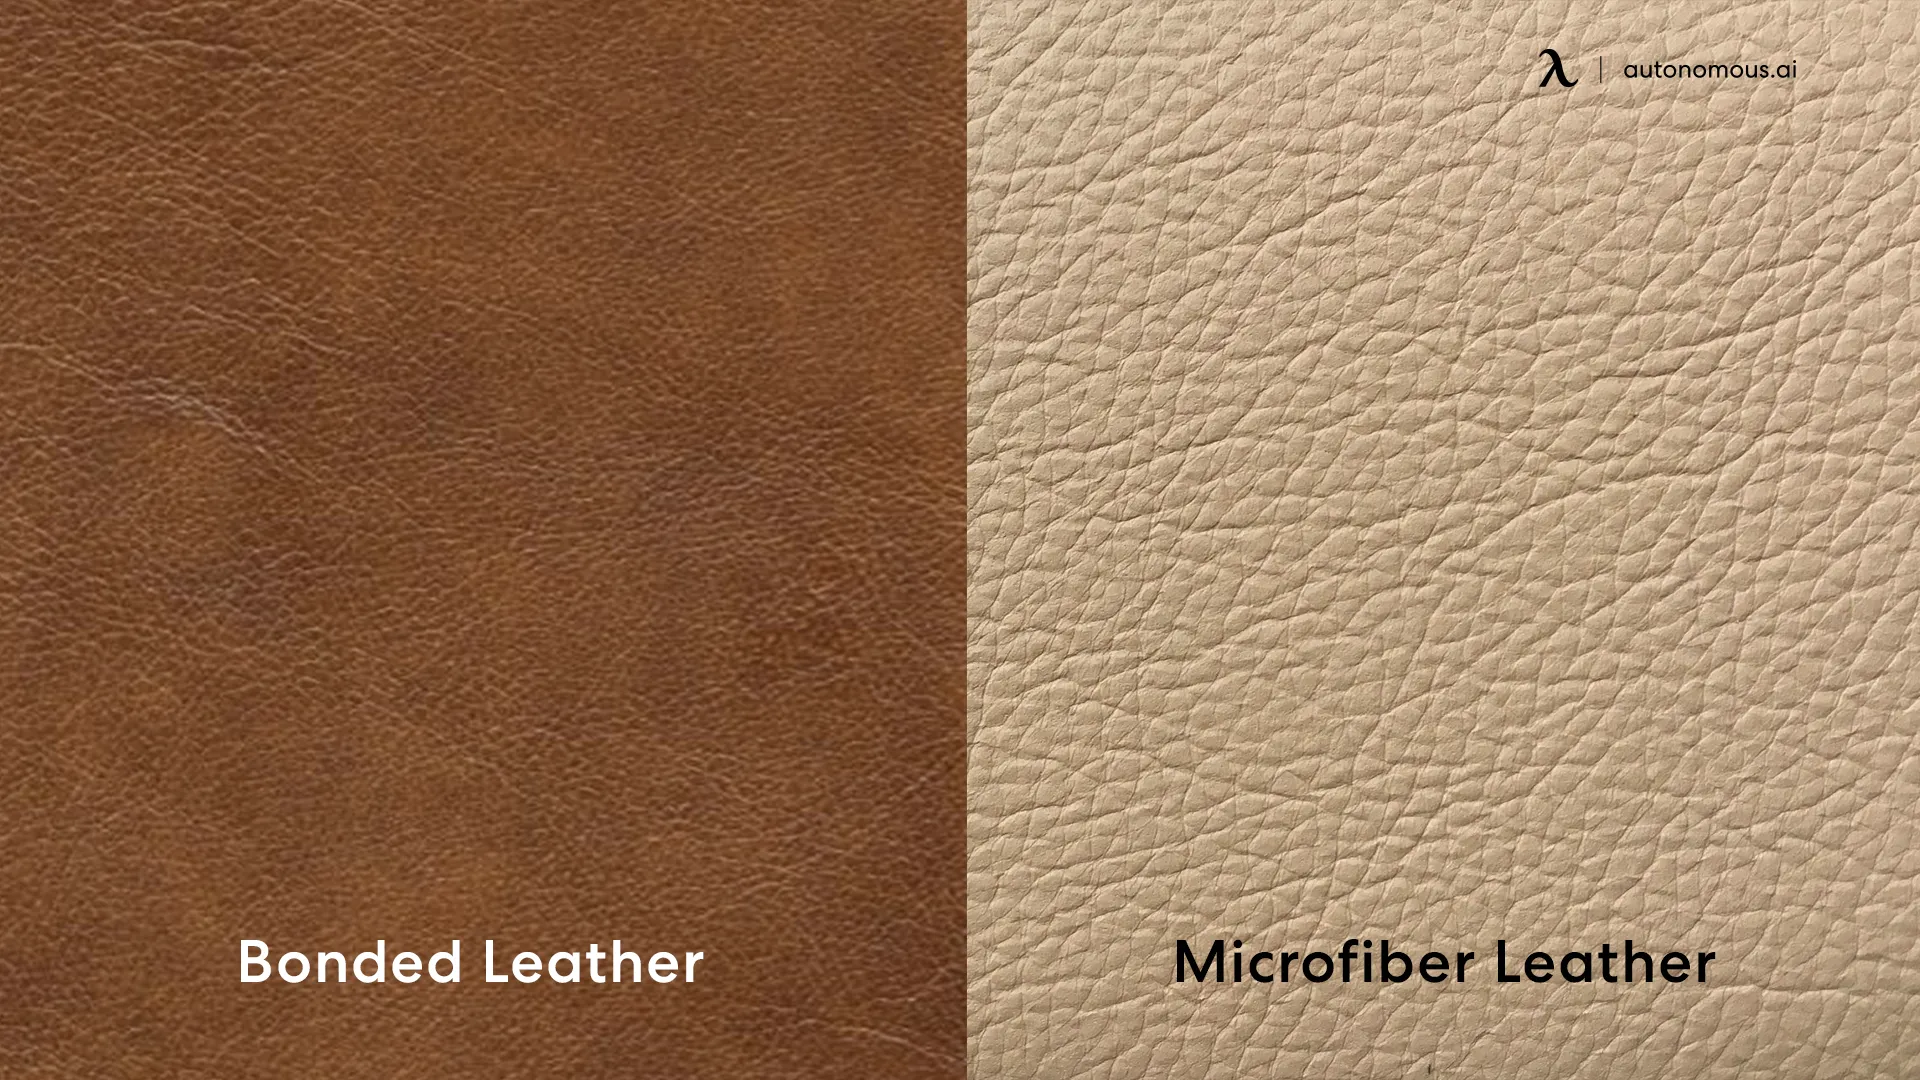 The Difference between Bonded Leather and Microfiber Leather